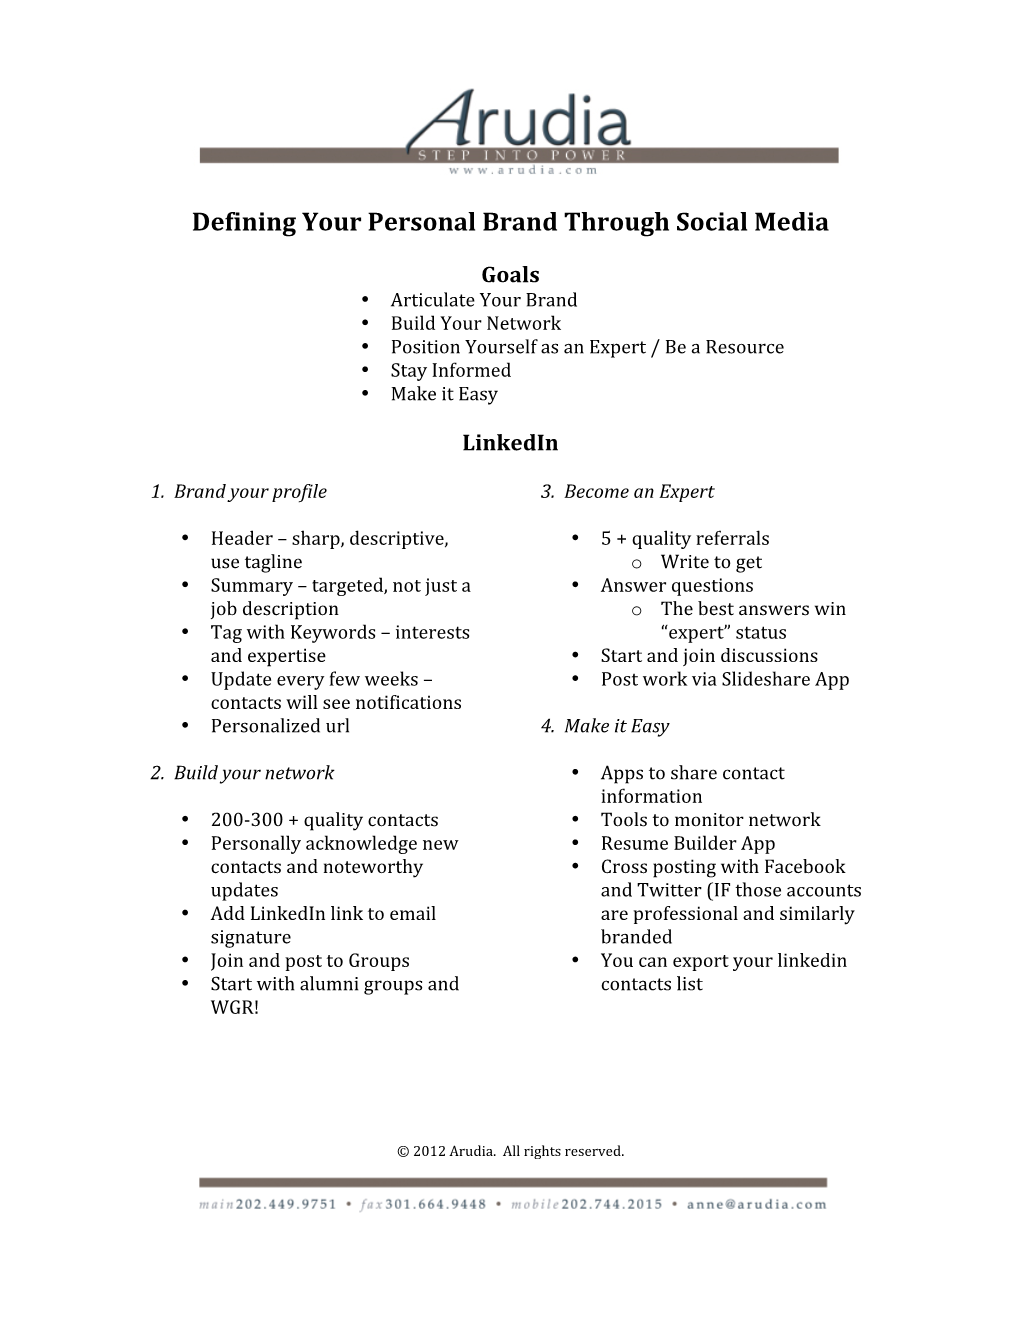 Tips for Using Social Media to Promote Your Personal Brand